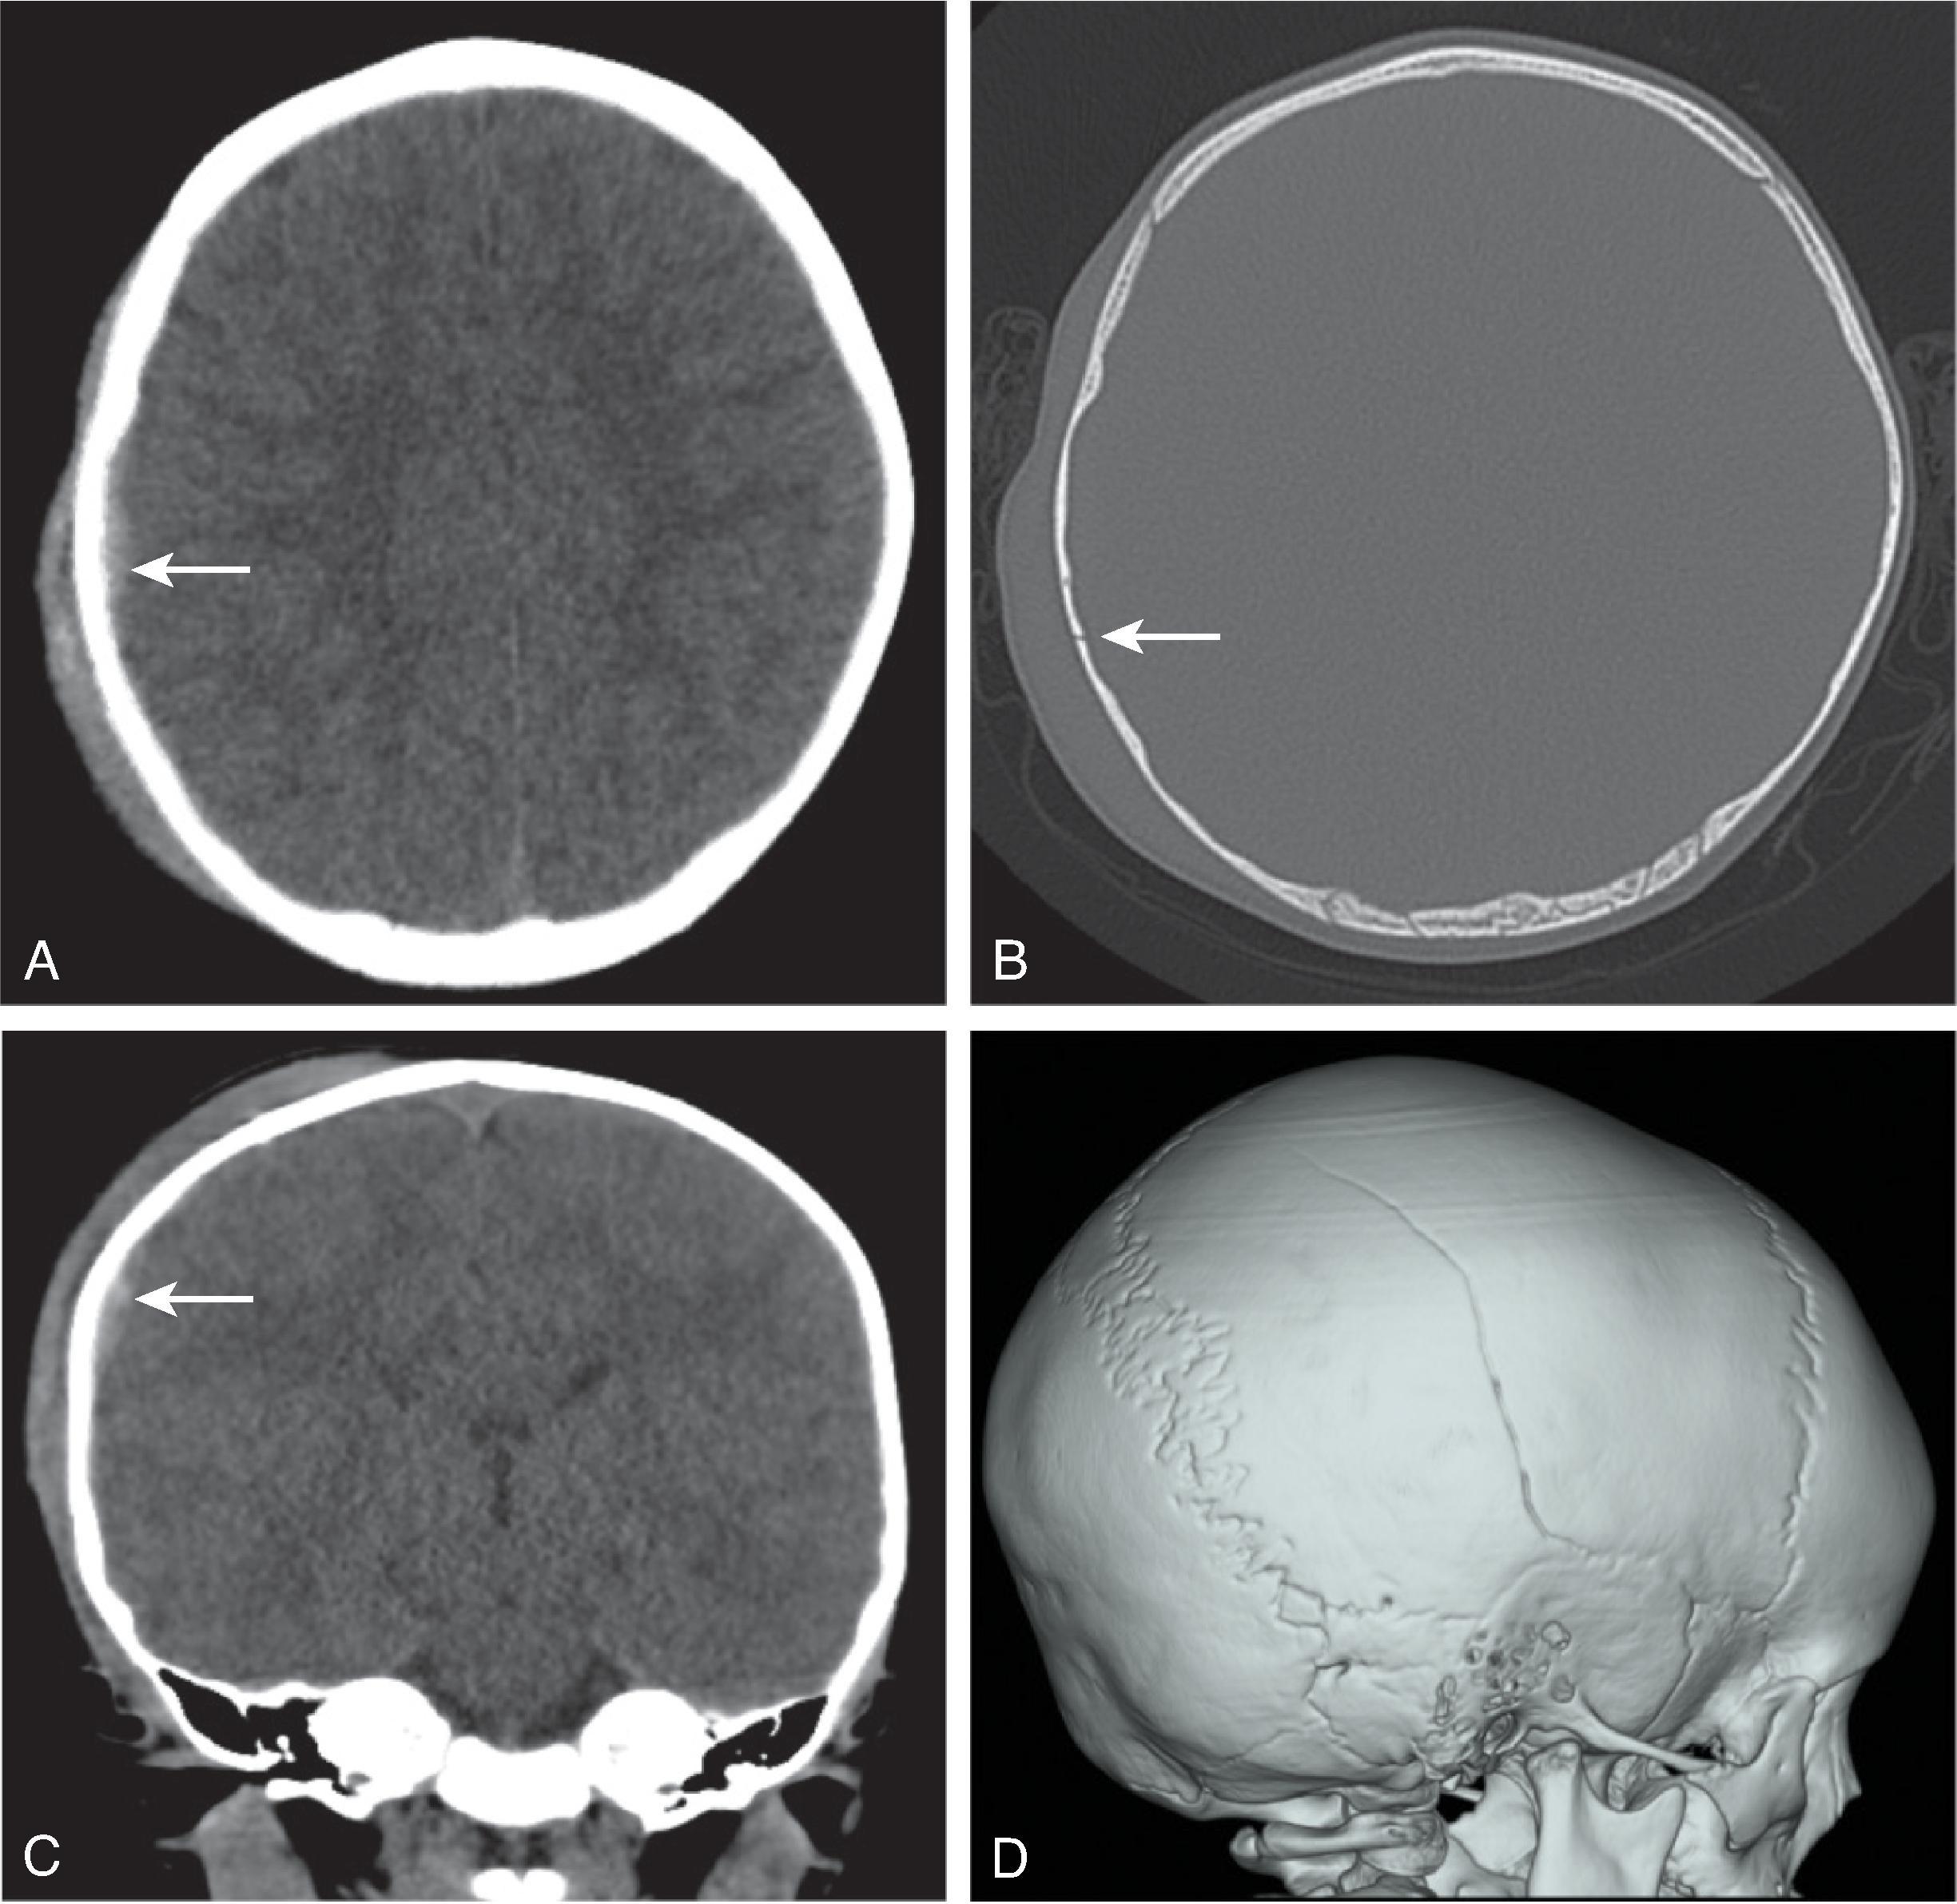 Fig. 10.9, Accidental Trauma . A 1-year-old with fall from high chair. (A and B) Axial head CT, (C) coronal head CT reformat, and (D) 3D volumetric CT images demonstrate and right parietal scalp subgaleal hematoma, a nondisplaced right parietal skull fracture ( arrow , image B), and a hyperdense/acute epidural hemorrhage ( arrow , images A and C) along the lateral right parietal lobe adjacent to the fracture.